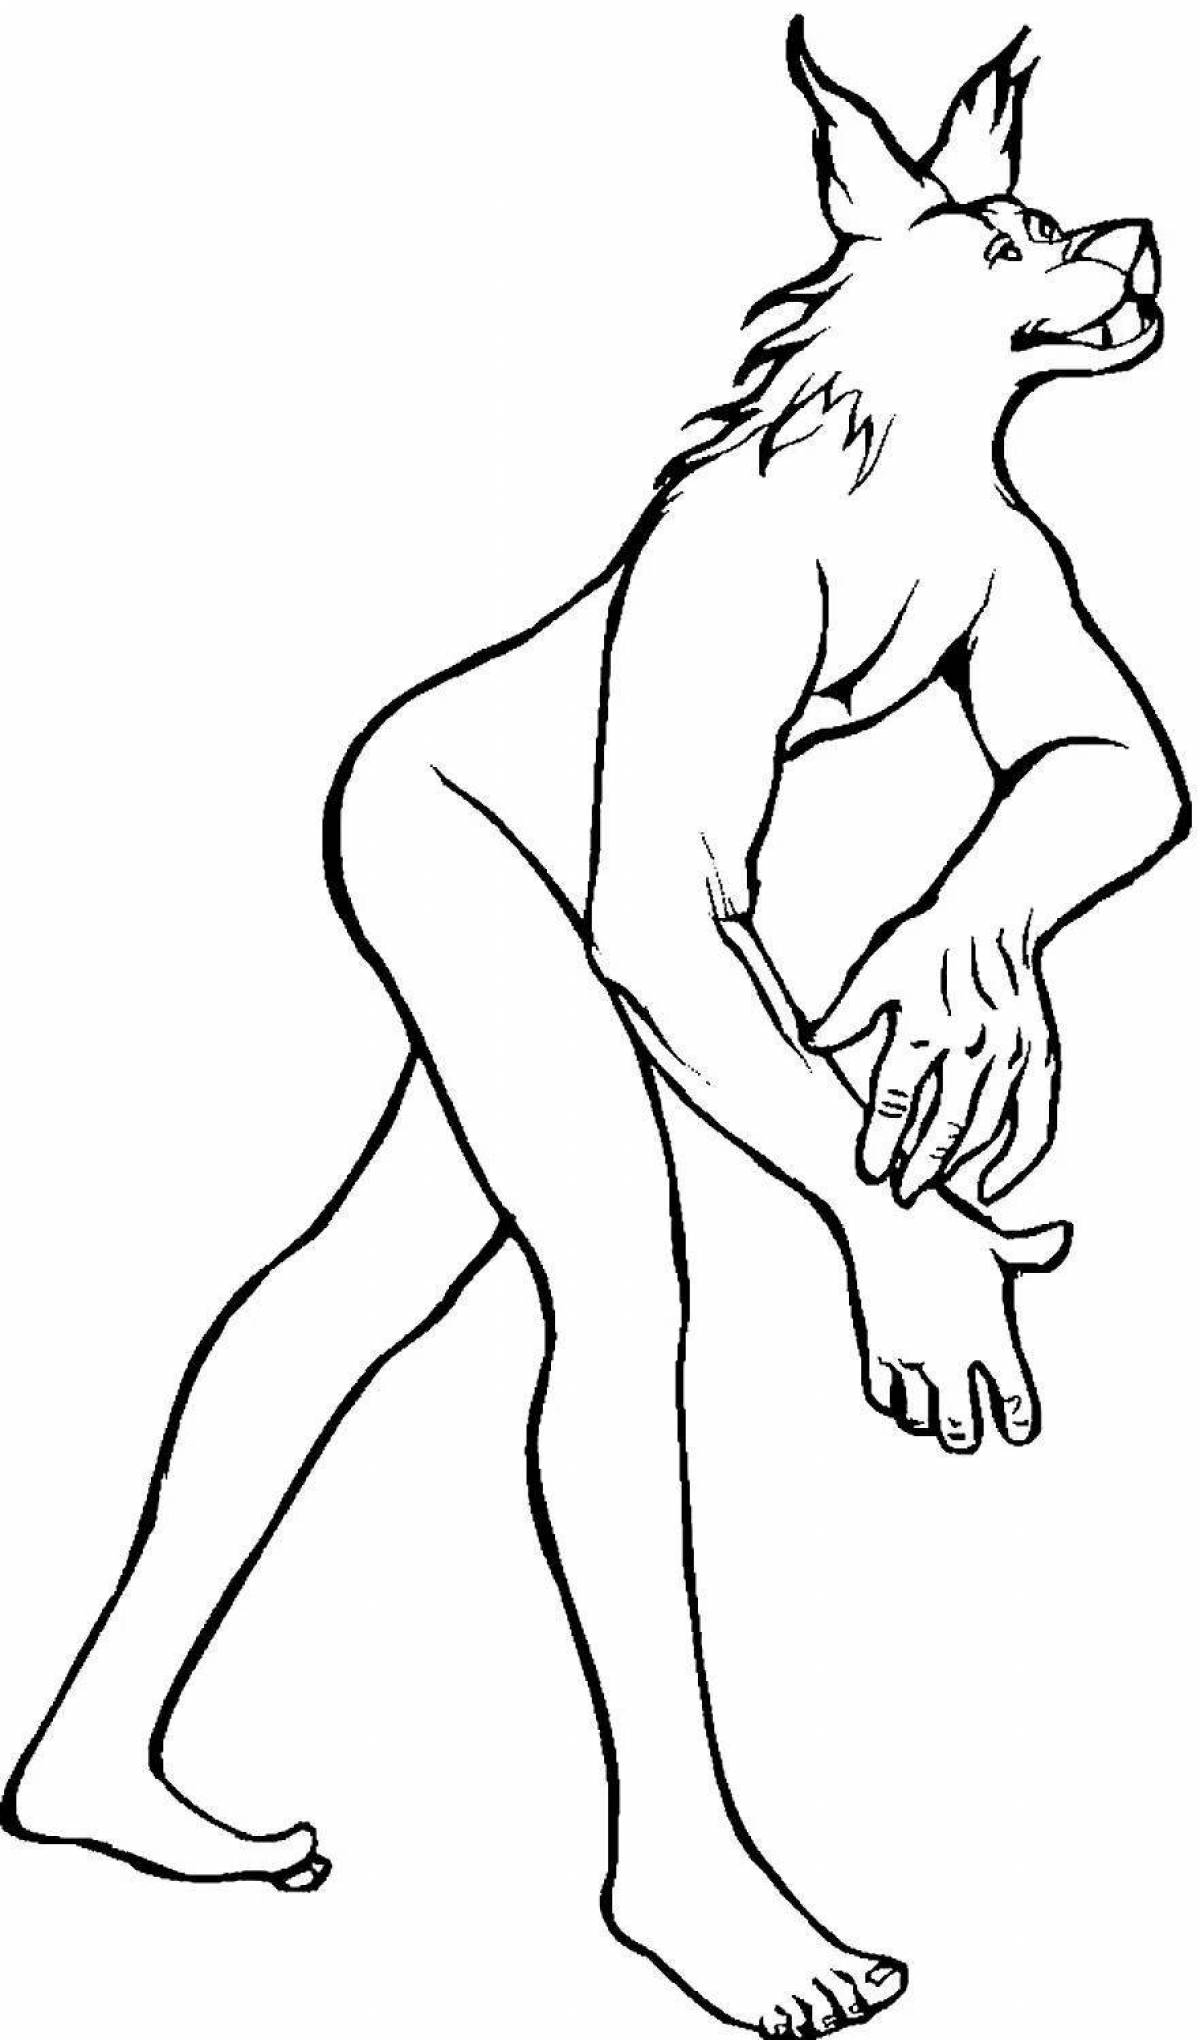 Intriguing werewolf coloring page